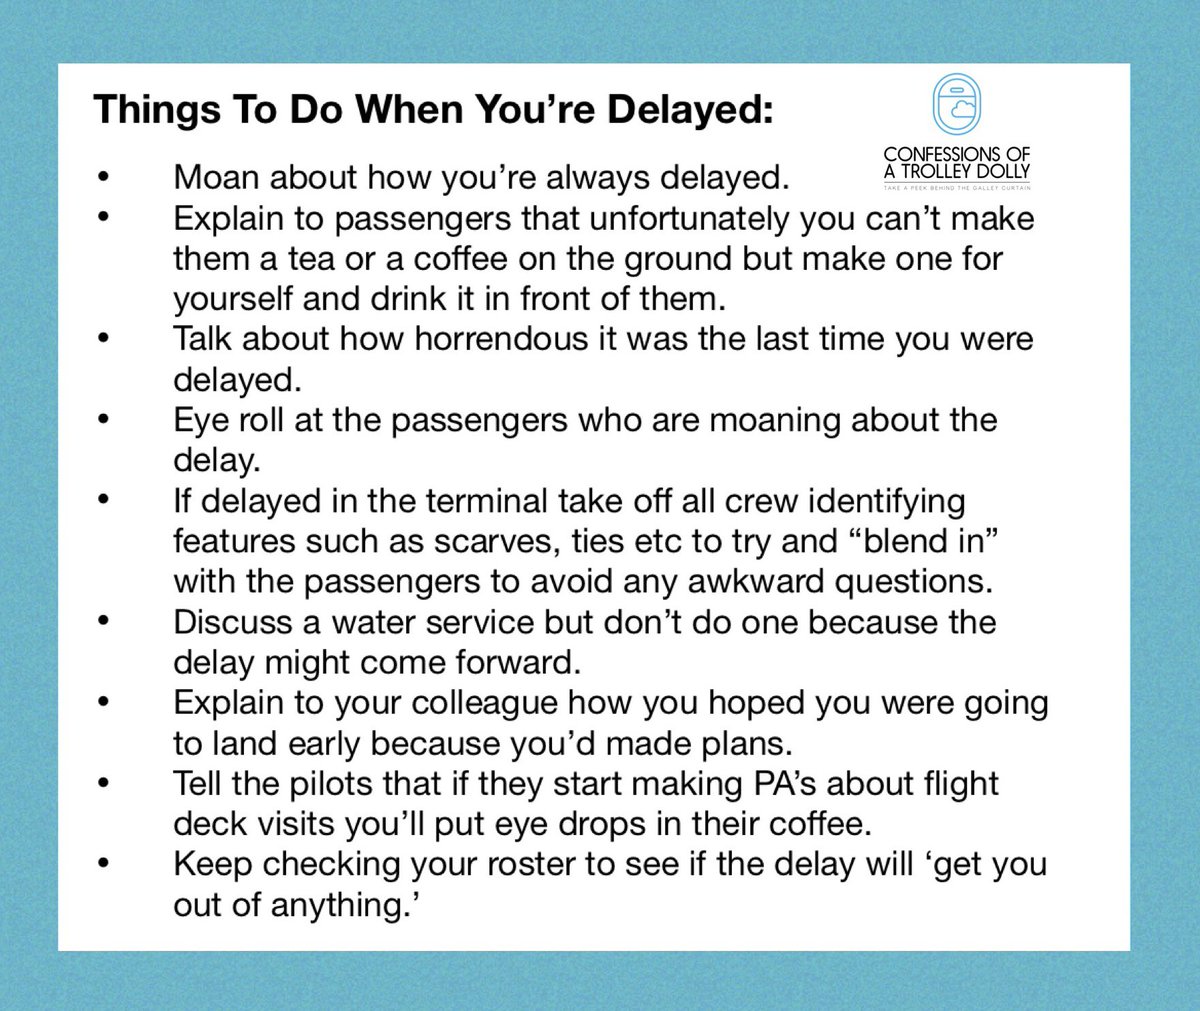 Seeing as our job is one big delay at the moment I thought I’d come up with a little delay guide.

#confessionsofatrolleydolly #crewlife #cabincrew #cabincrewproblems #airlinelife #airportlife #airportdelays #airlinehumor #airlinedelays